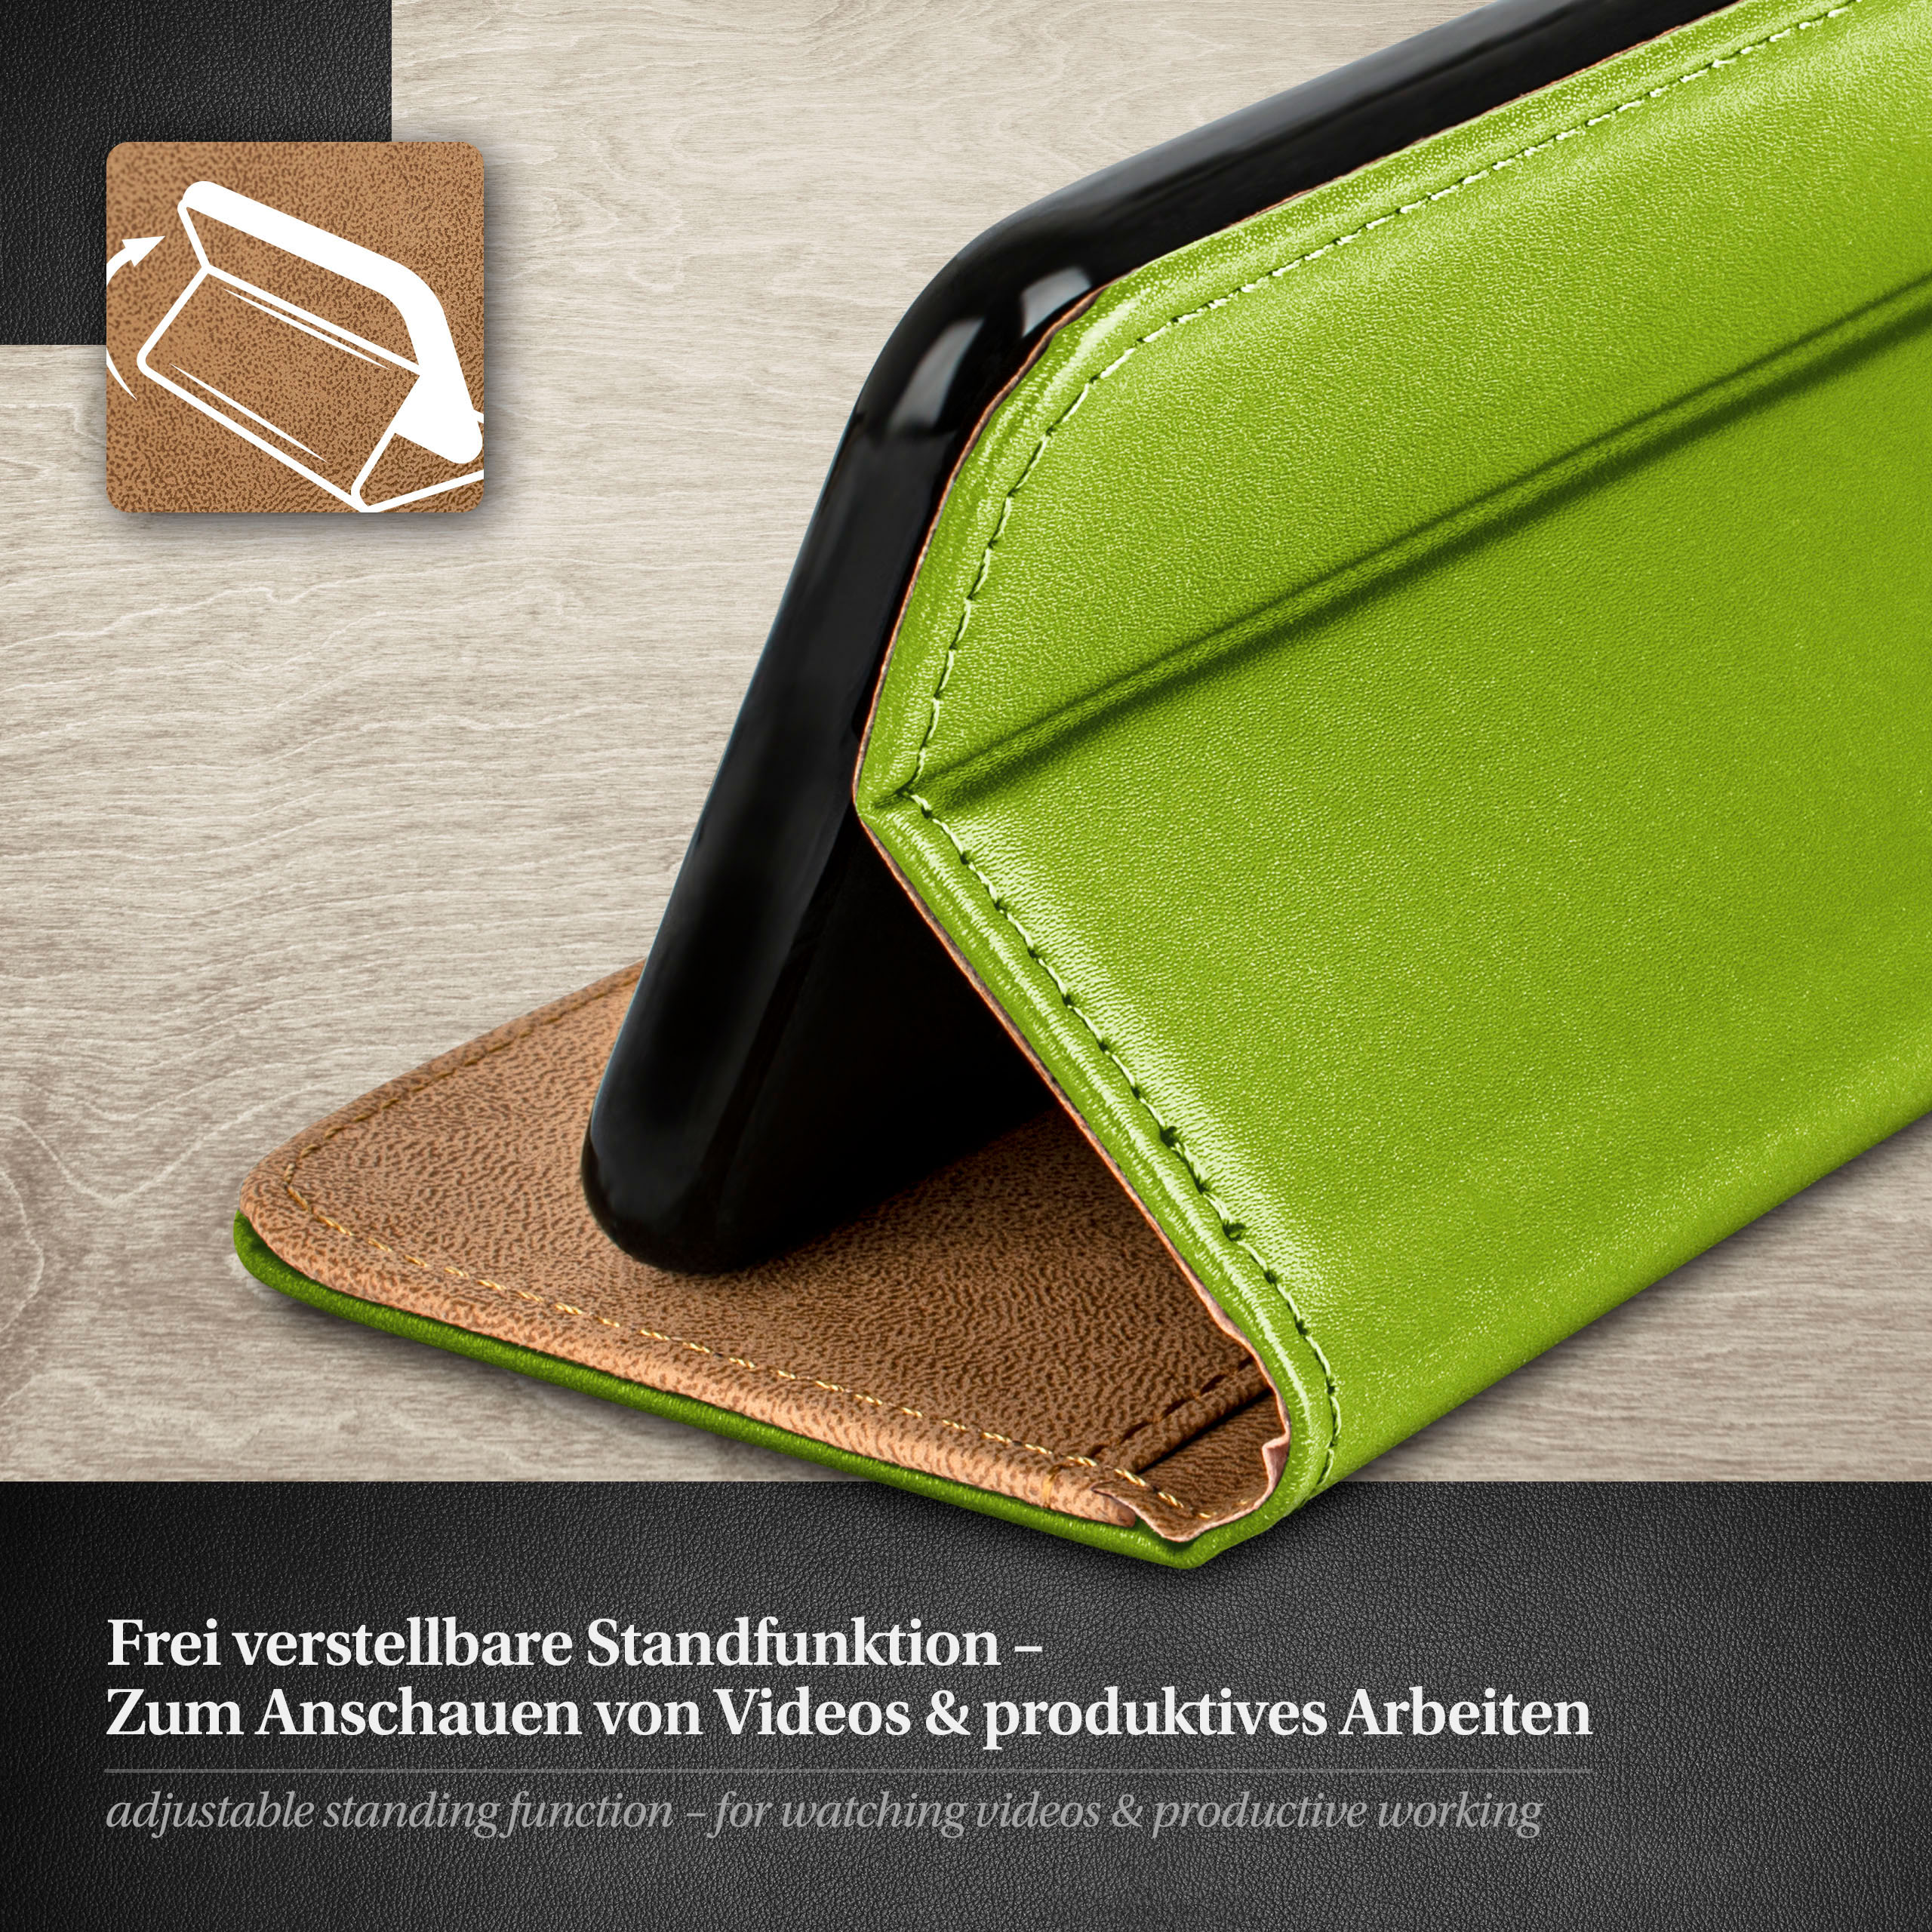 MOEX Book Case, Bookcover, Galaxy Samsung, Lime-Green Note 10